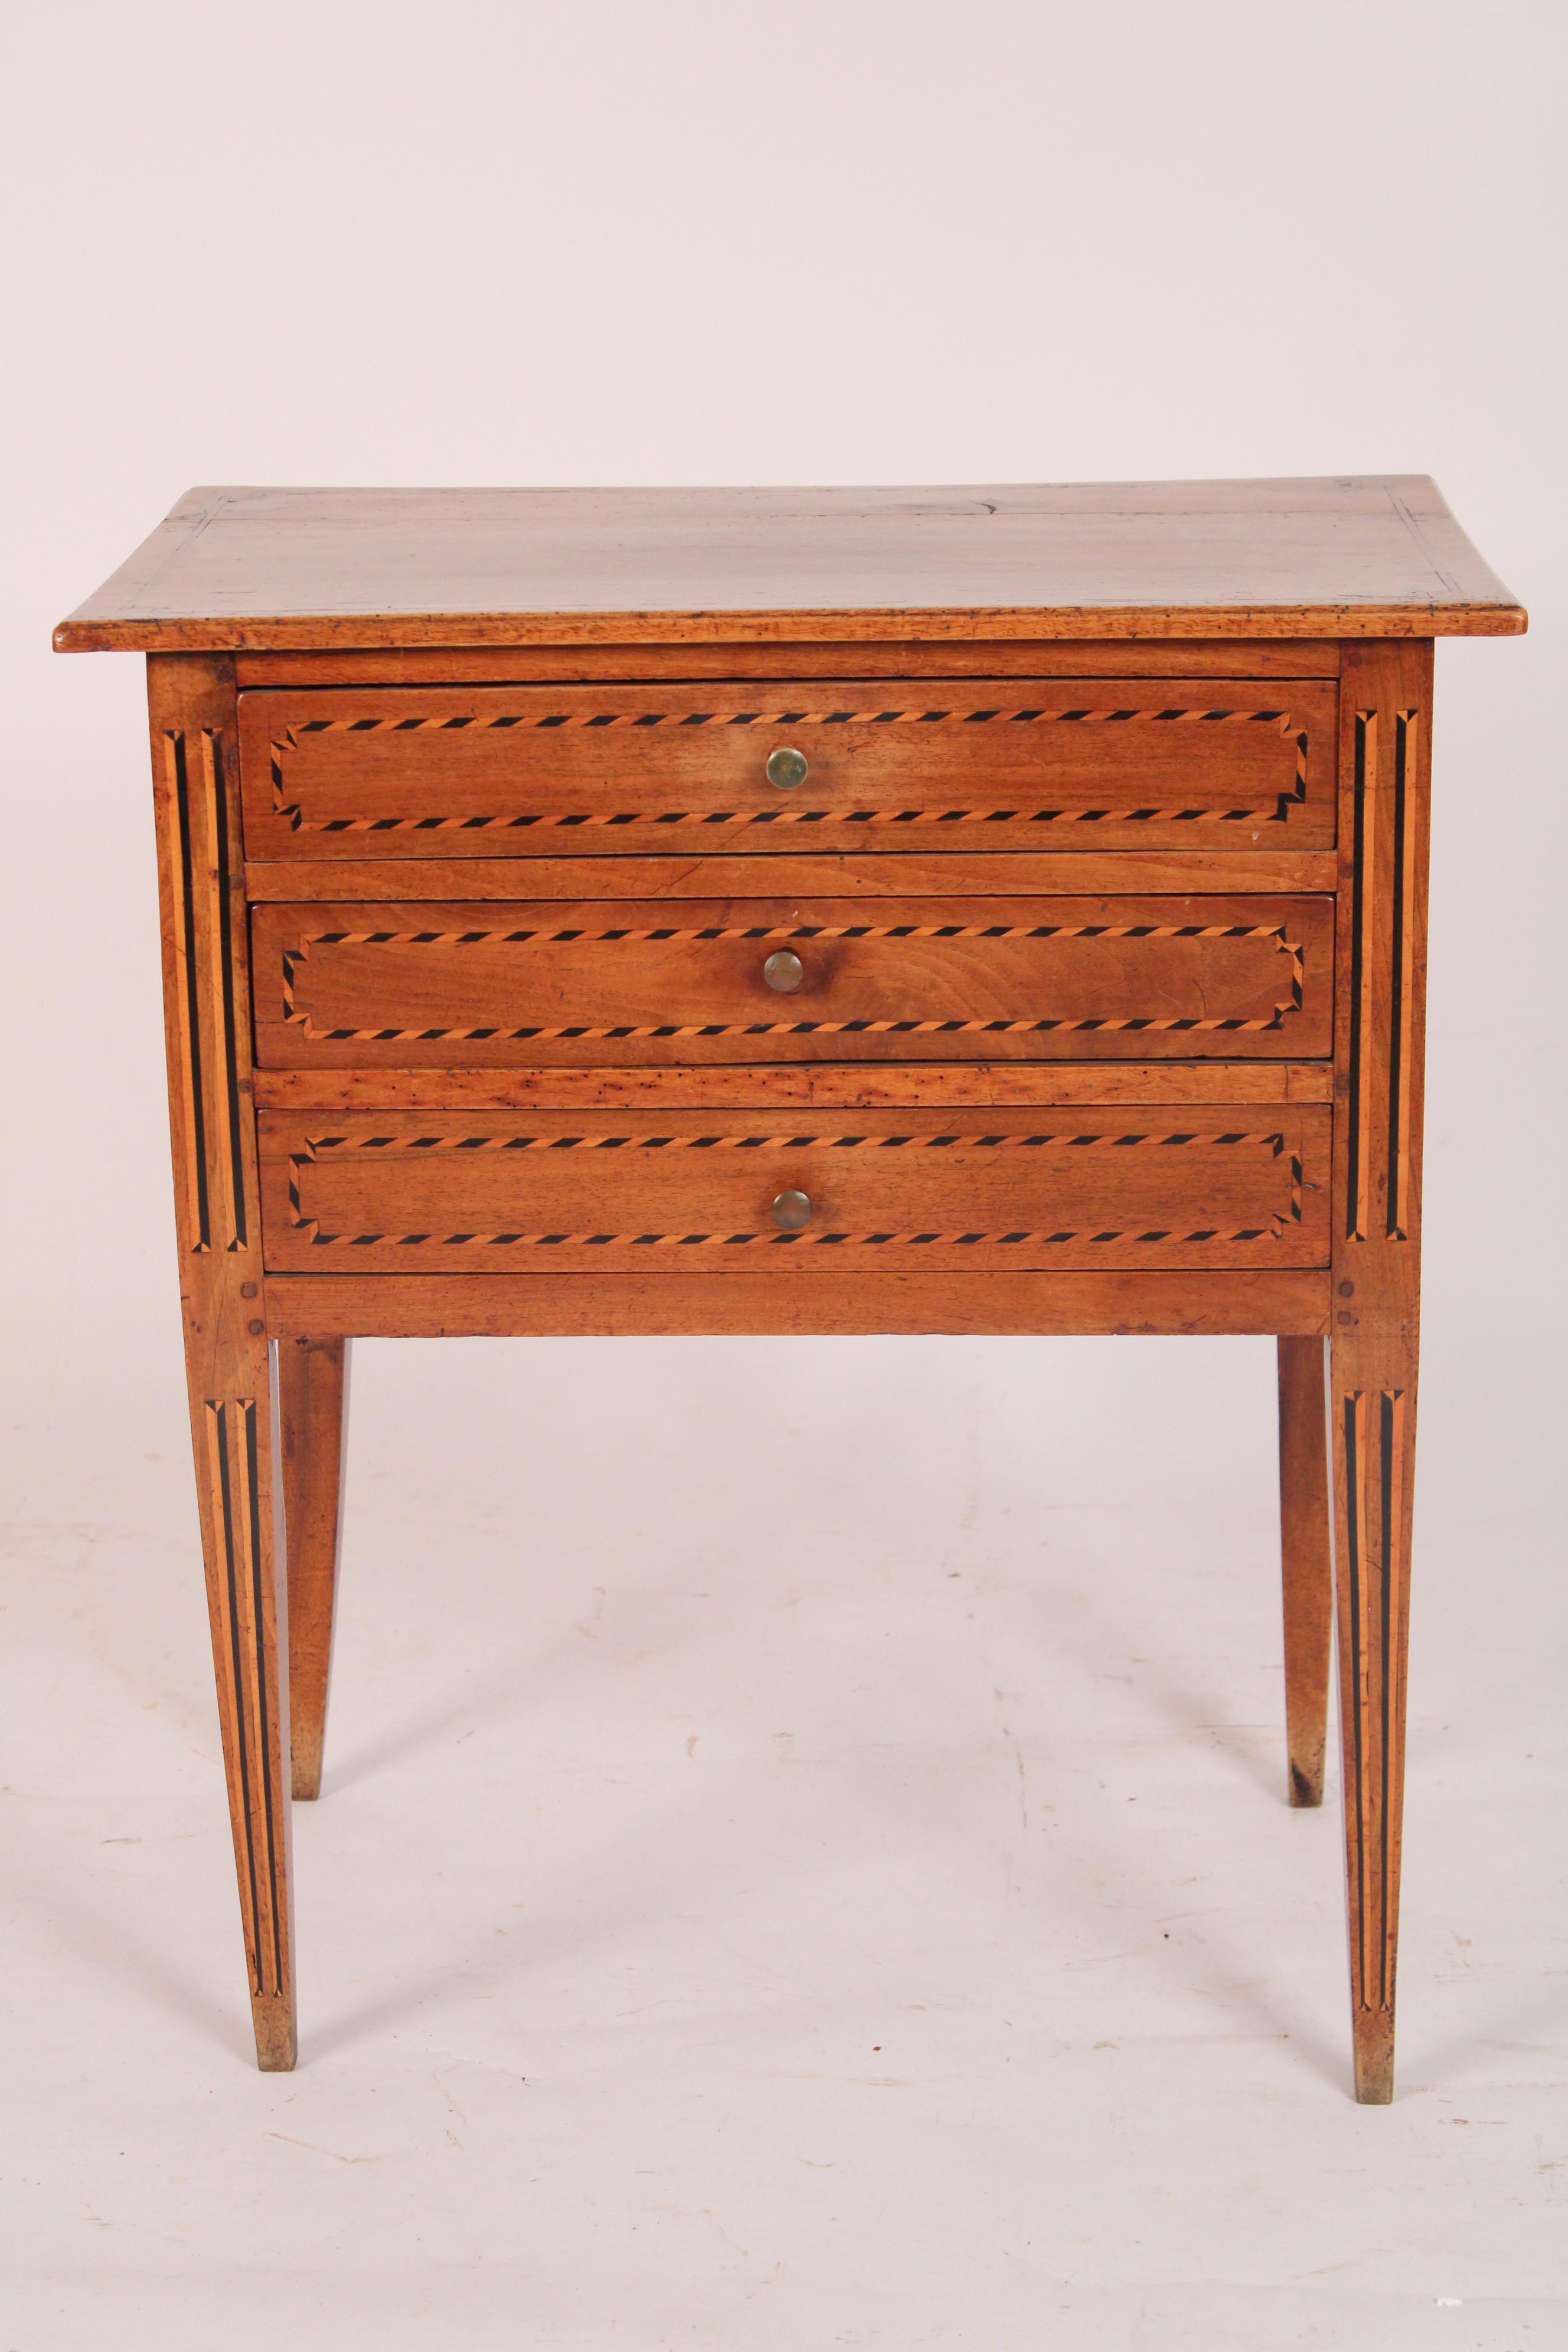 Directoire walnut 3 drawer chest of drawers / end table, early 19th century. With a two board rectangular top with thumb molded borders, 3 drawers each with ebony and tulip wood inlay,  sides with burl walnut panels, resting on ebony and tulip wood